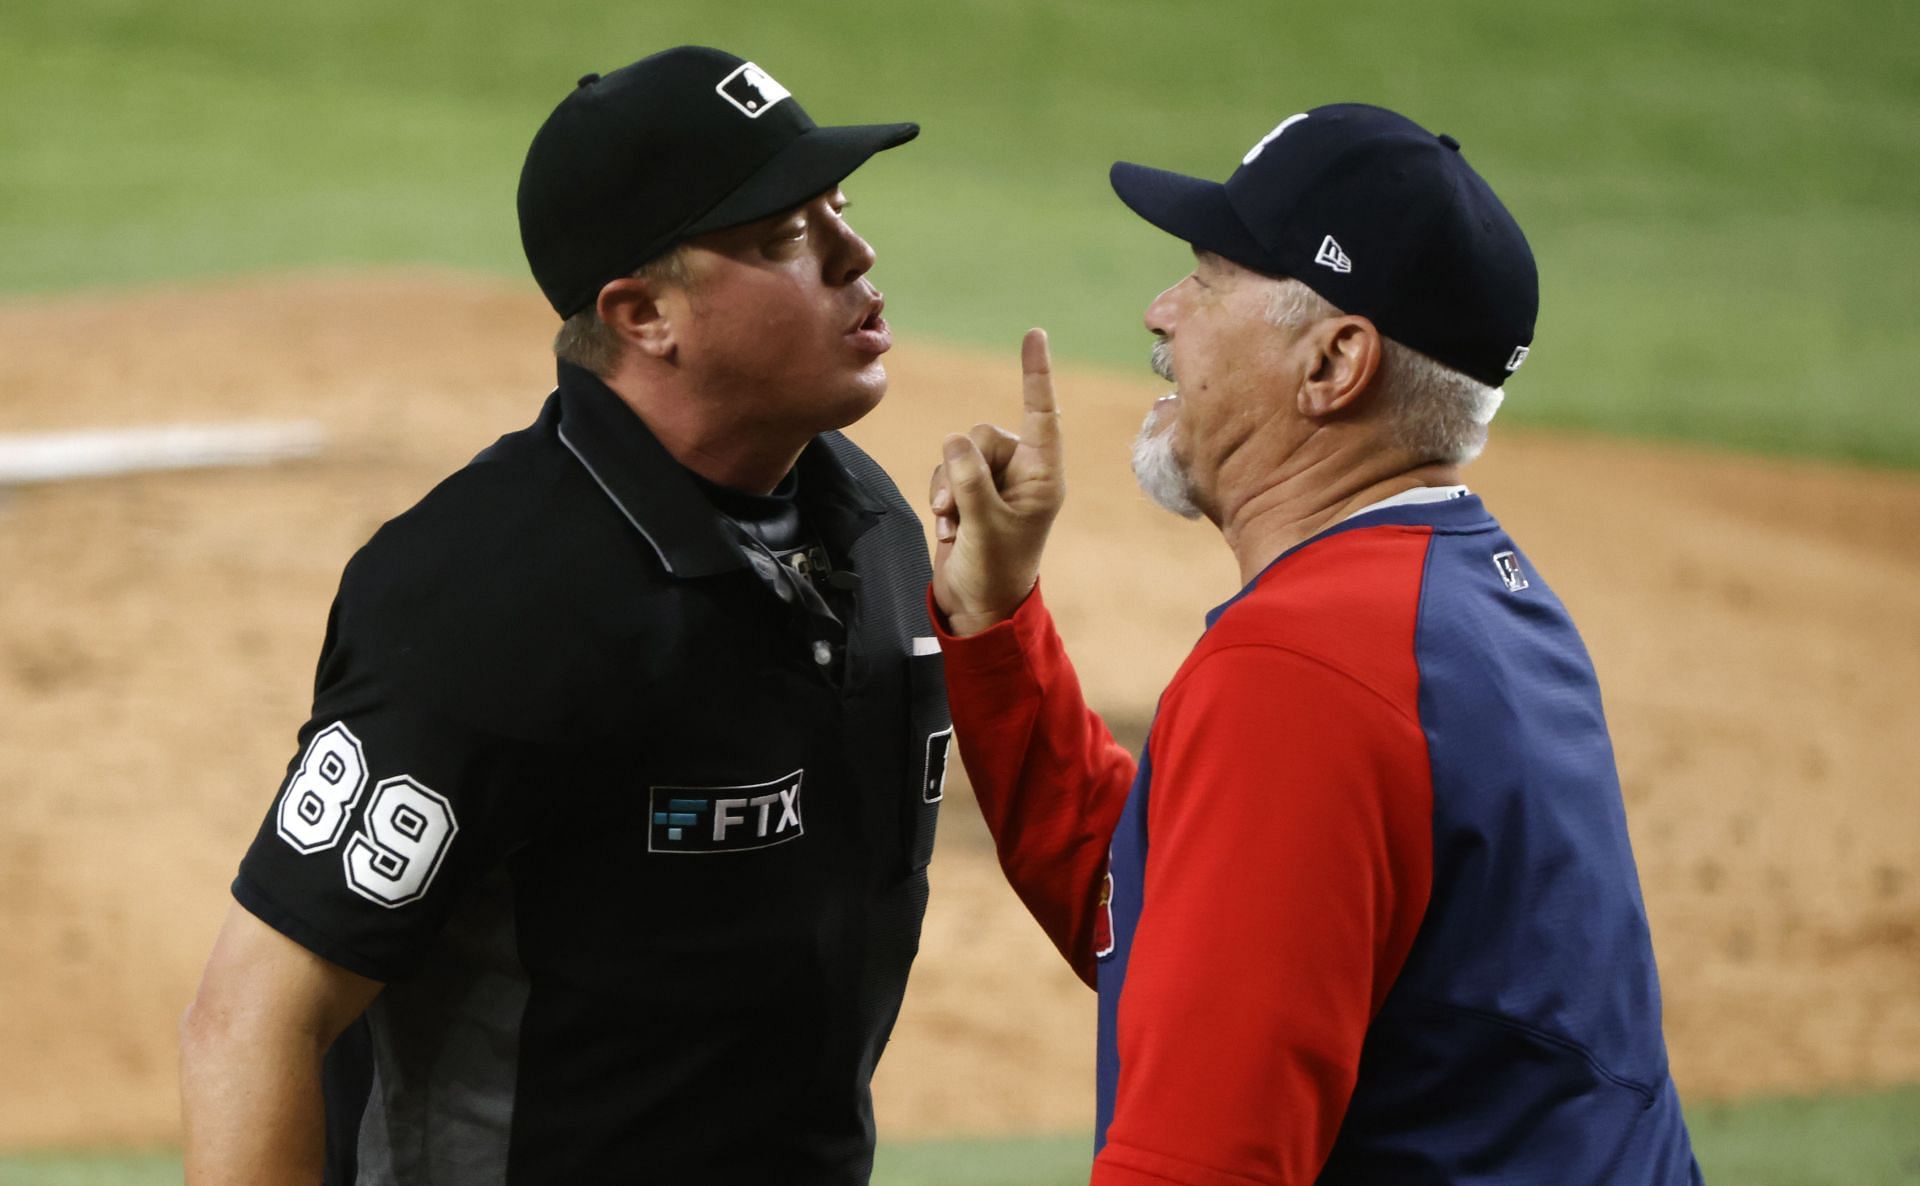 Baseball fans have been fuming about the poor quality of the MLB&#039;s umpires this season.